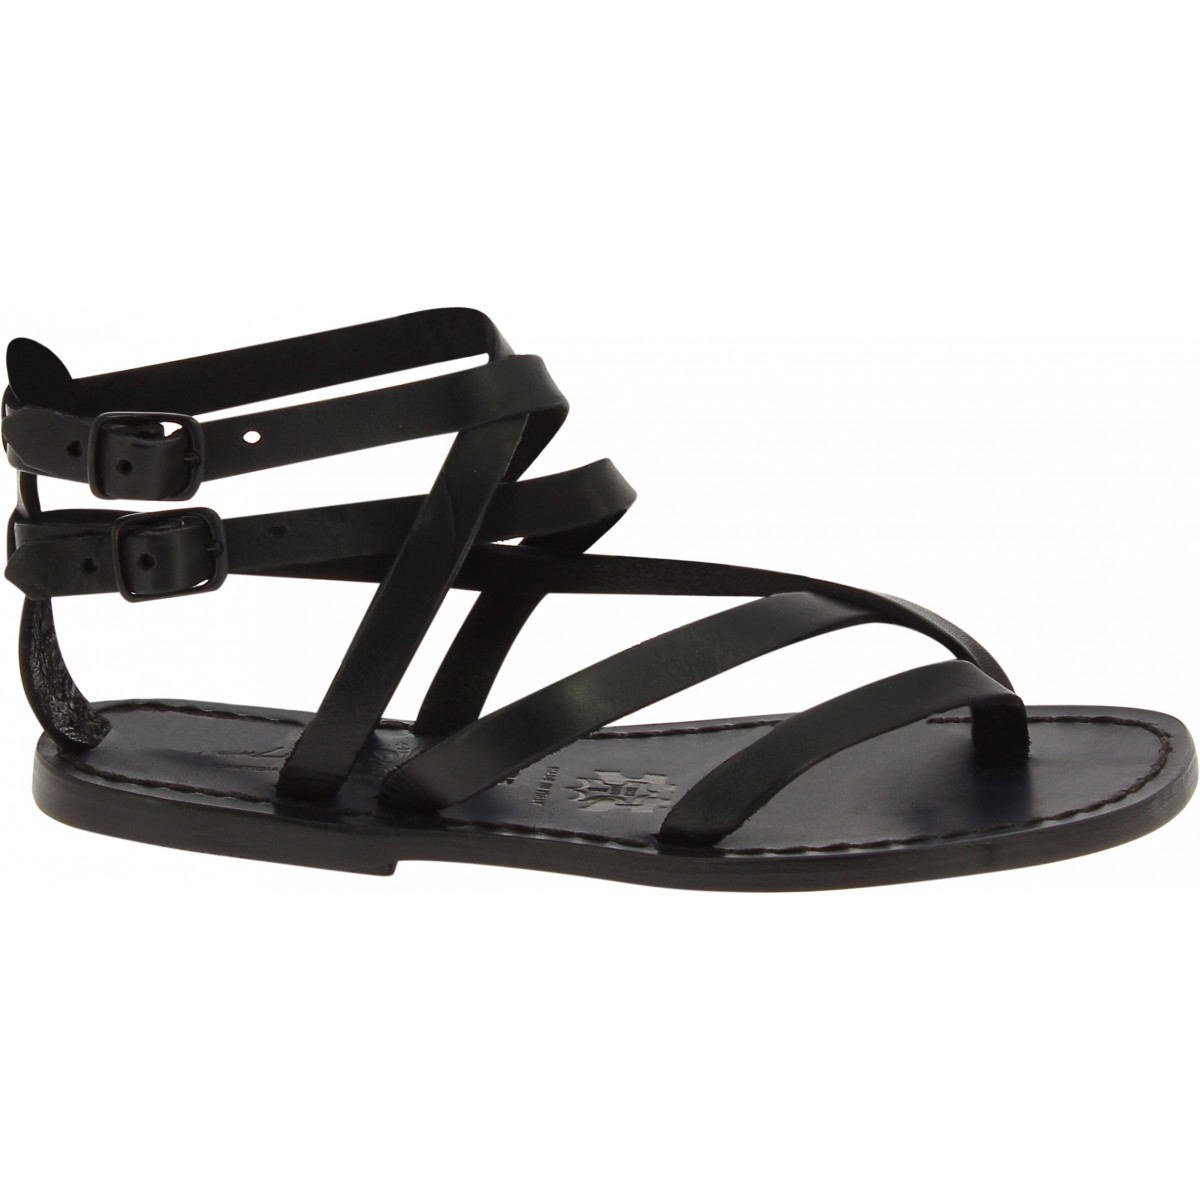 Handmade women's flat sandals in black leather | The leather craftsmen